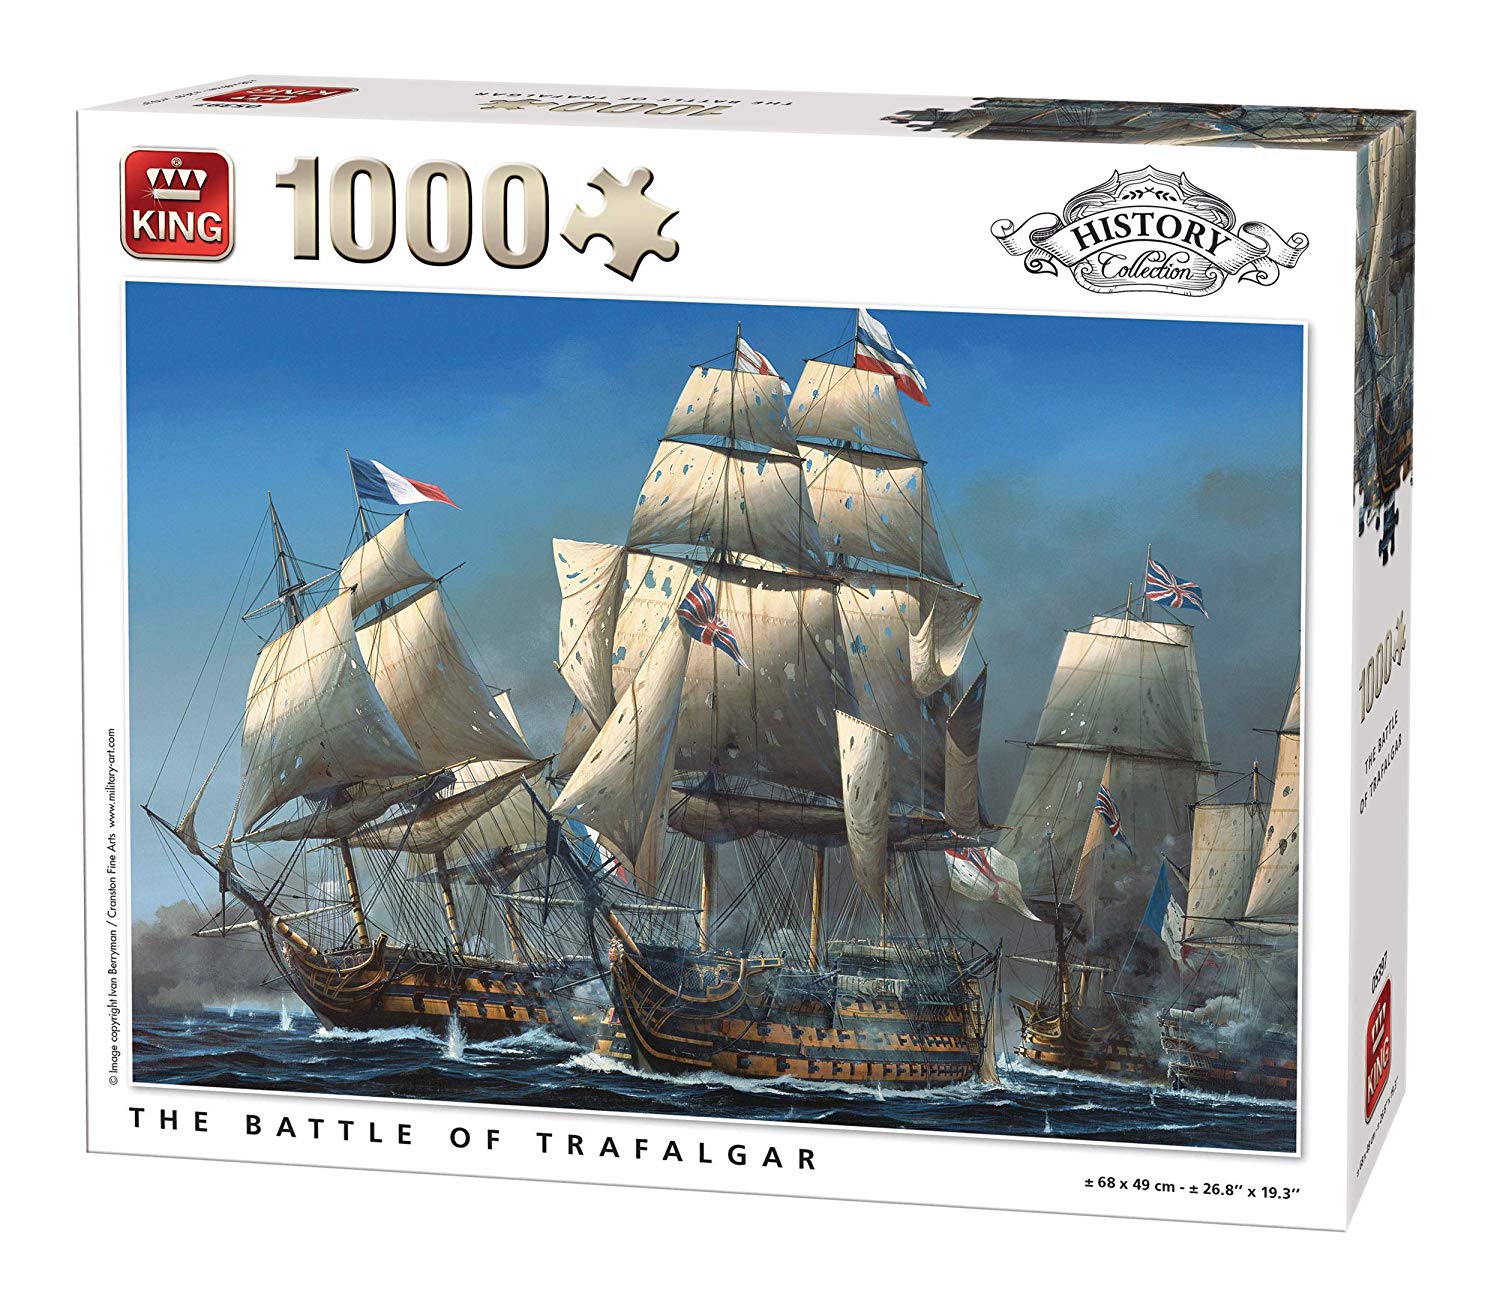 King Kng05397 History Of The Battle Of Trafalgar Puzzle (1000 Pieces)